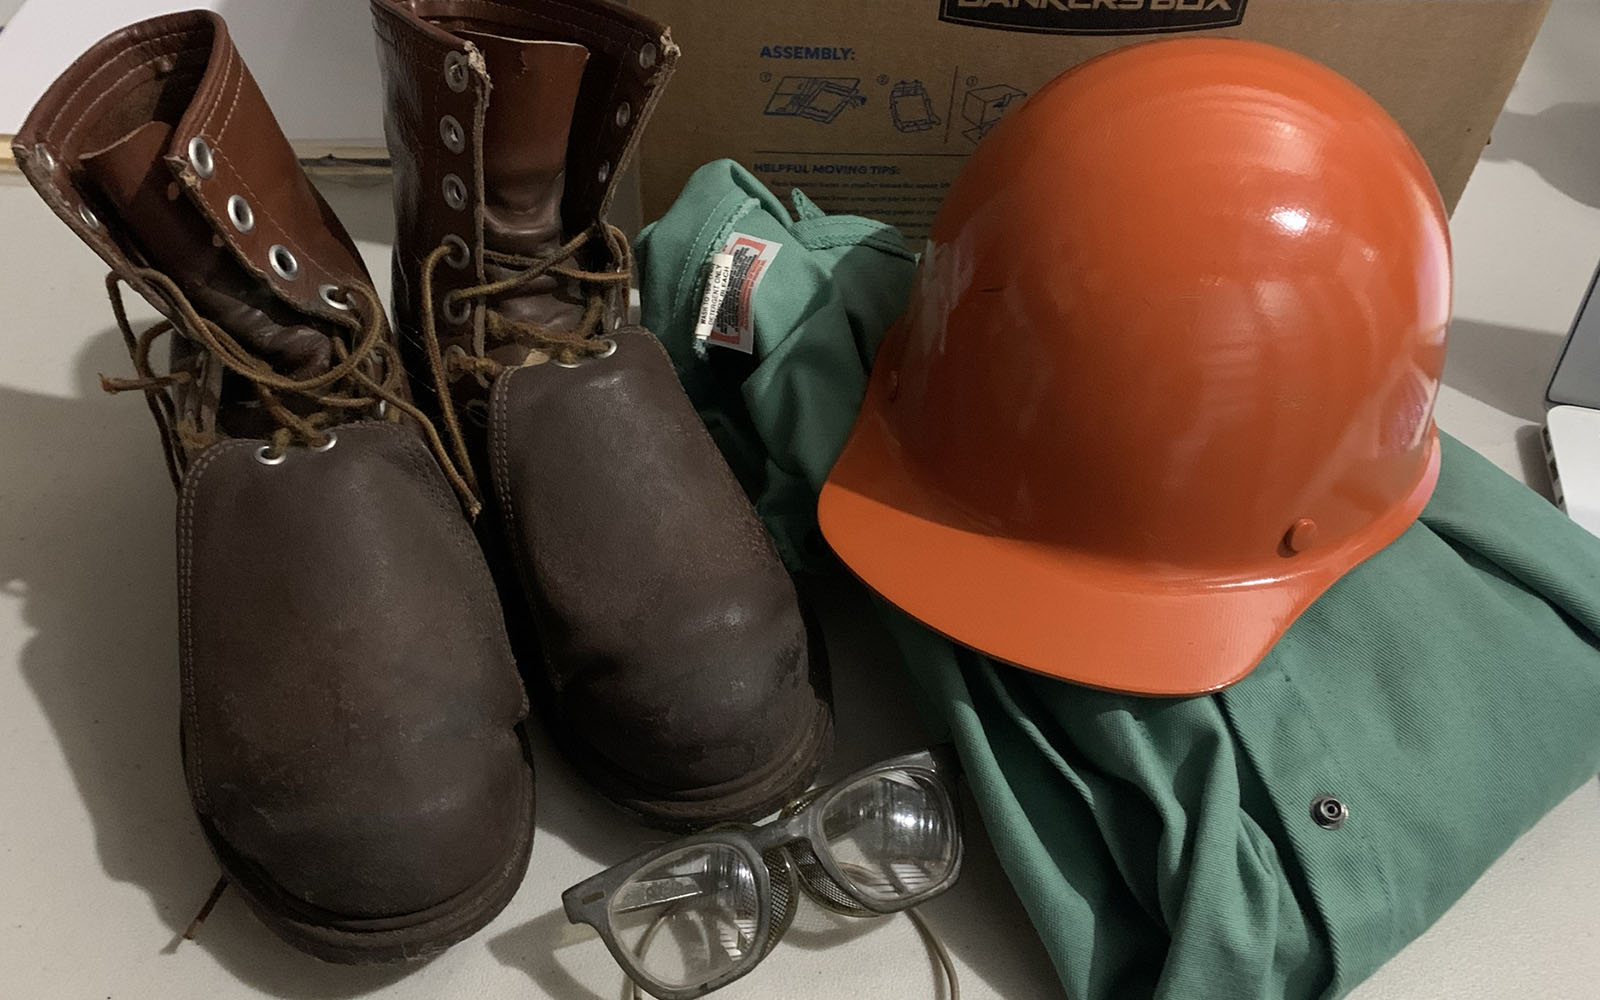 brown, steel toed boots, a orange hard hat, greens protective wear, and safety glasses.